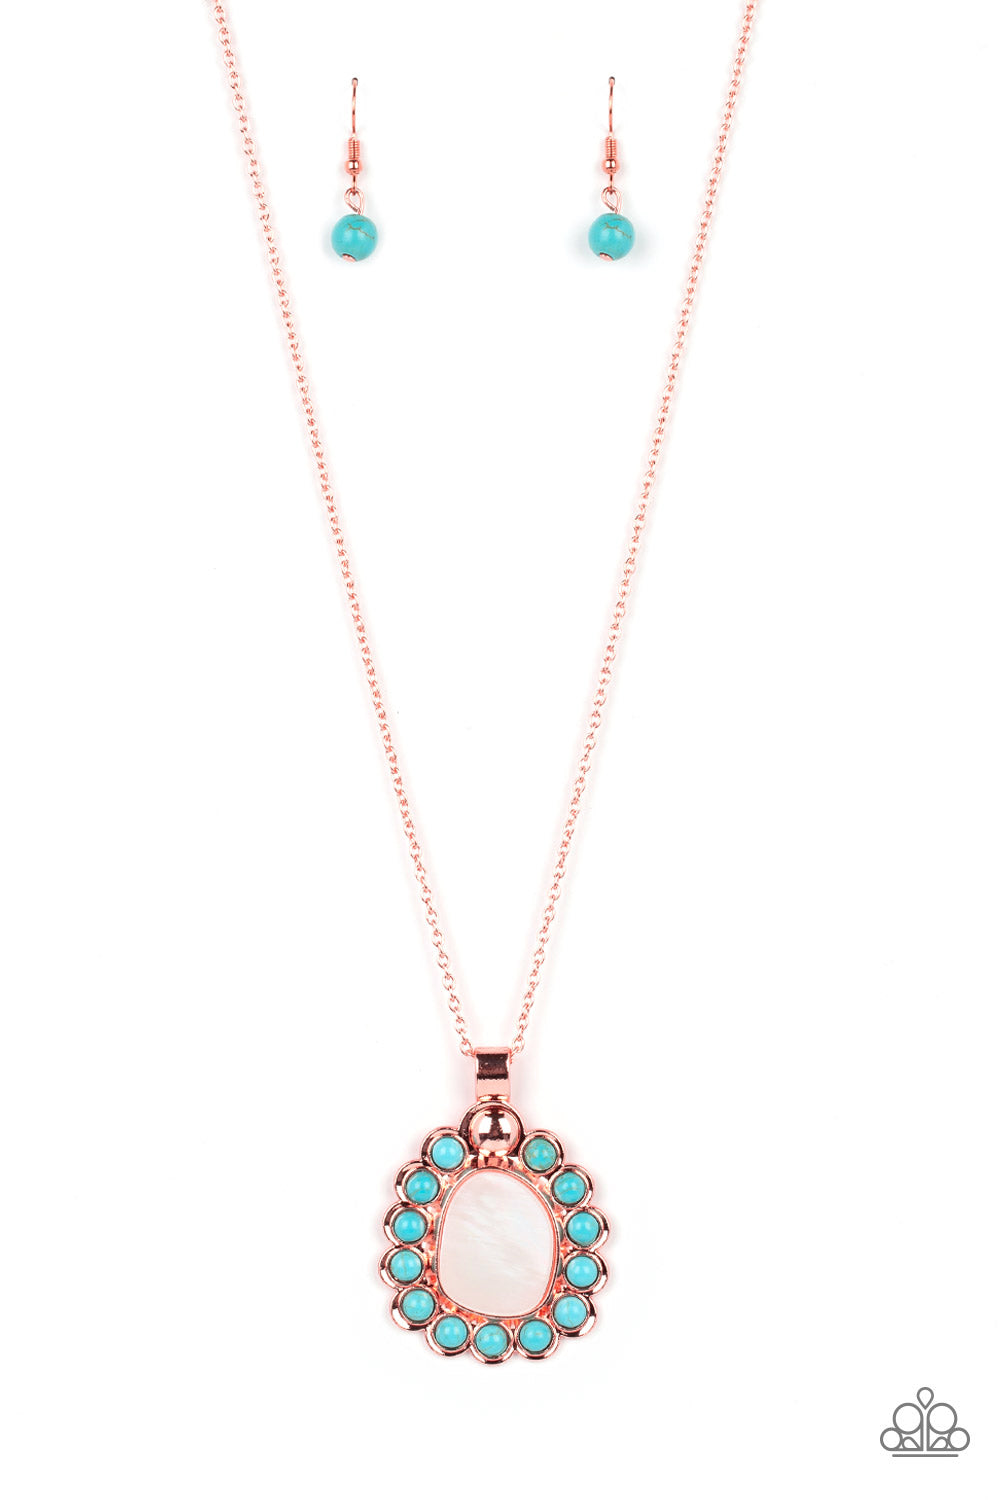 Paparazzi Sahara Sea - Copper Necklace - A Finishing Touch Jewelry